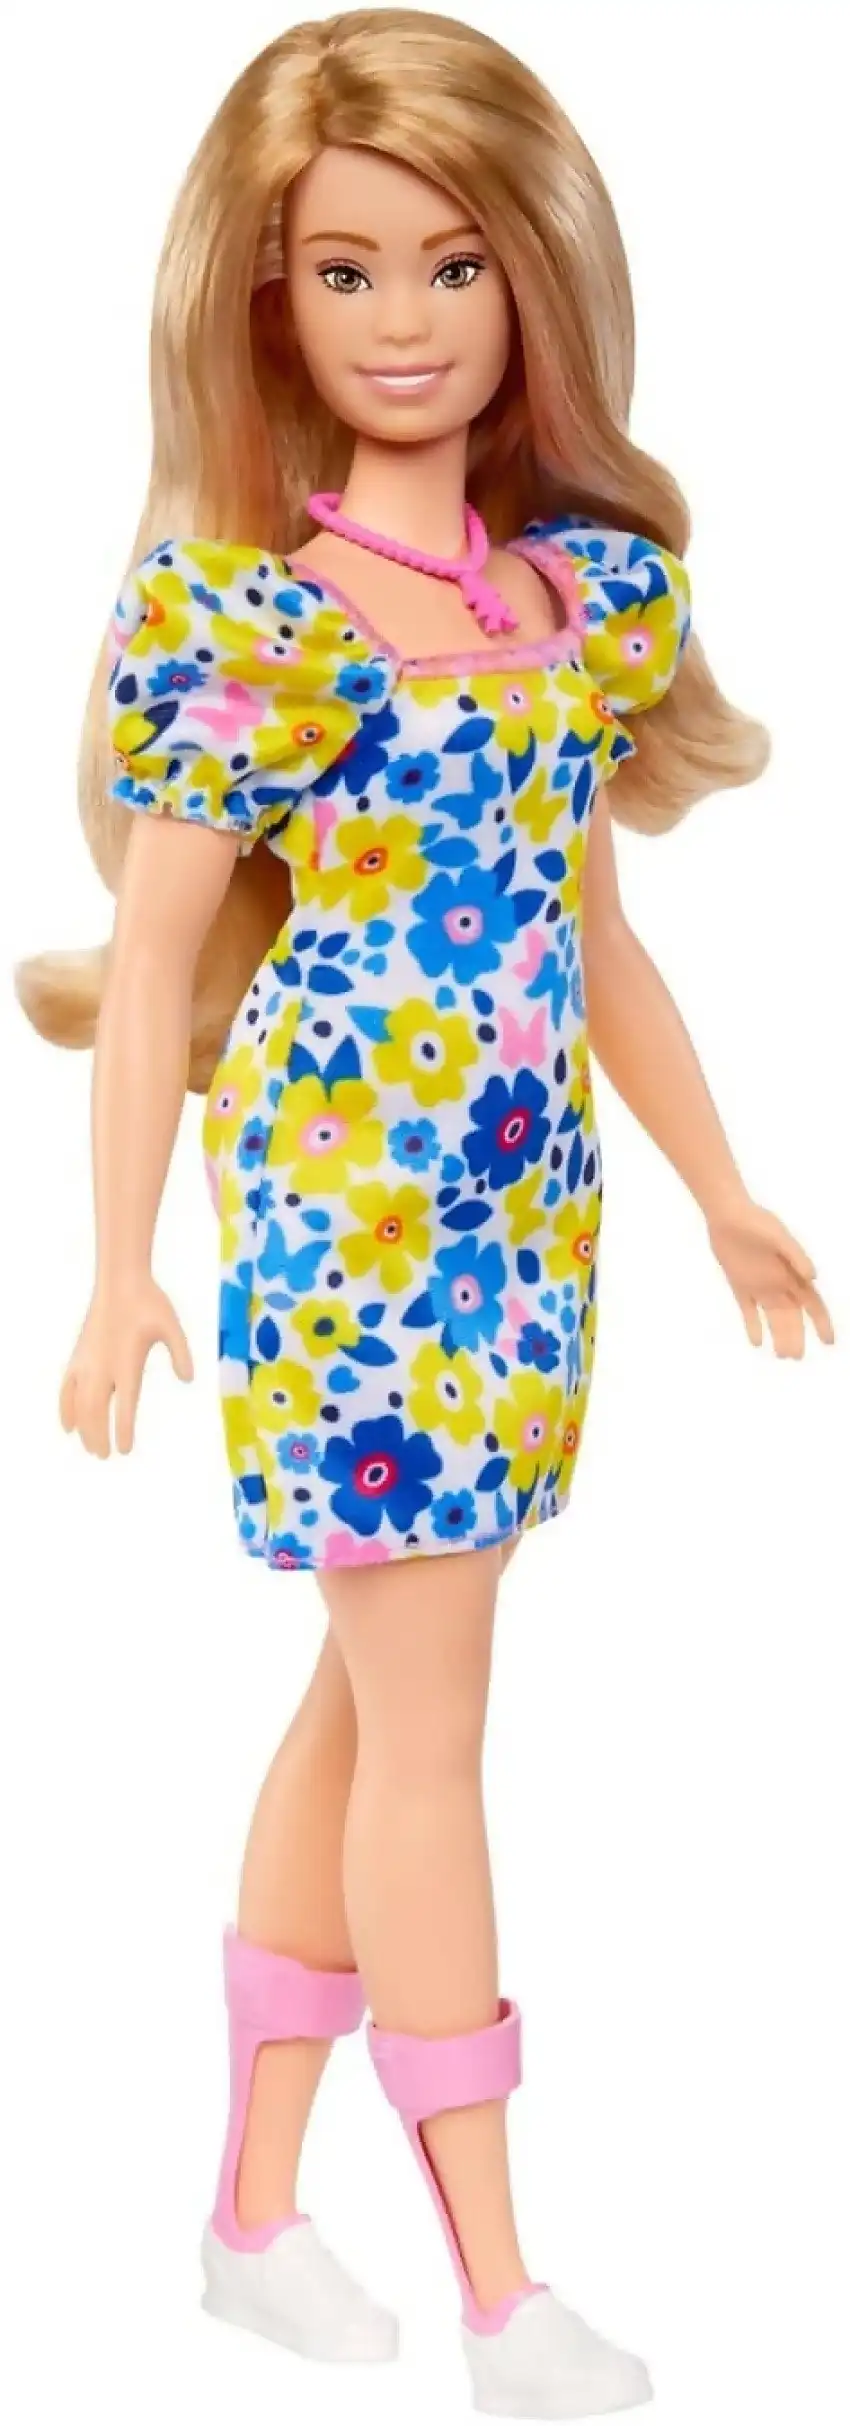 Barbie - Fashionistas Doll With Down Syndrome Wearing Floral Dress - Mattel